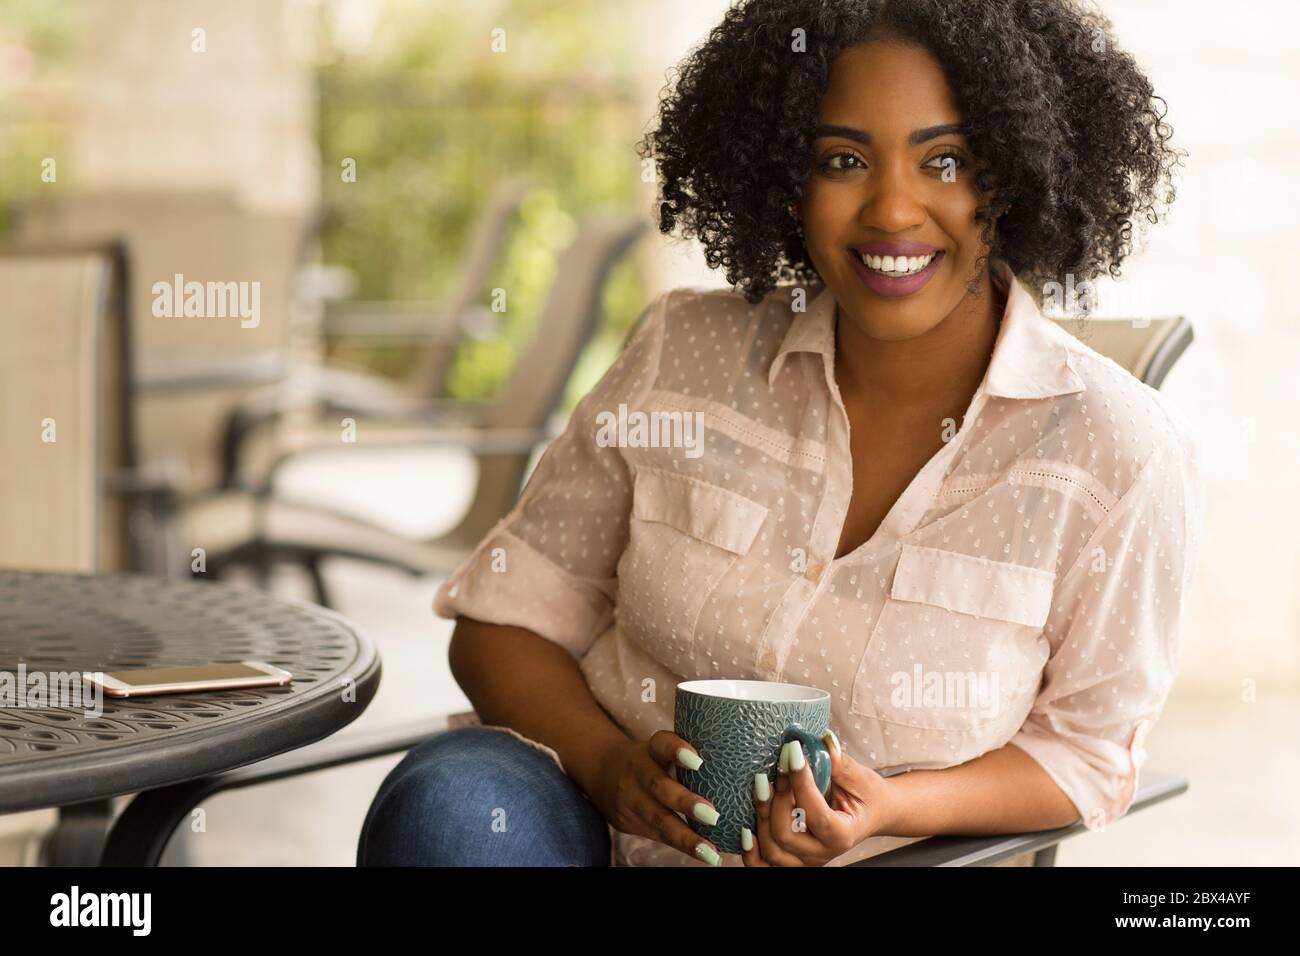 Portrait of an African American woman drinking coffee. Stock Photo